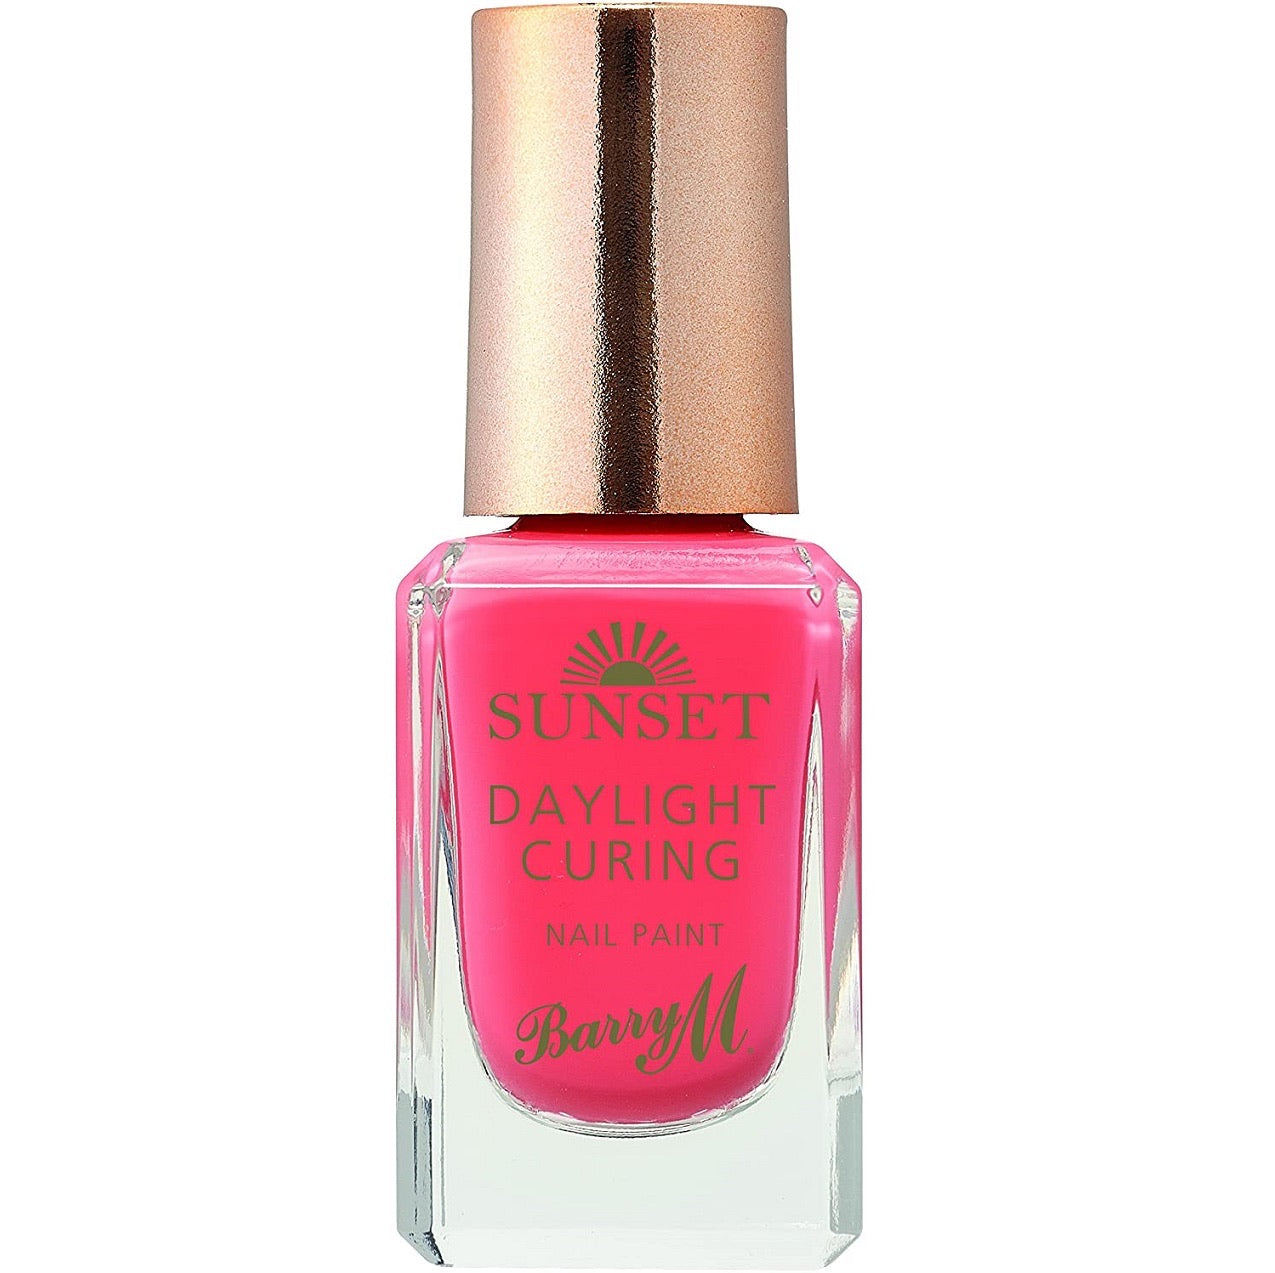 Barry M Sunset Daylight Curing Nail Polish – Peach for the Stars